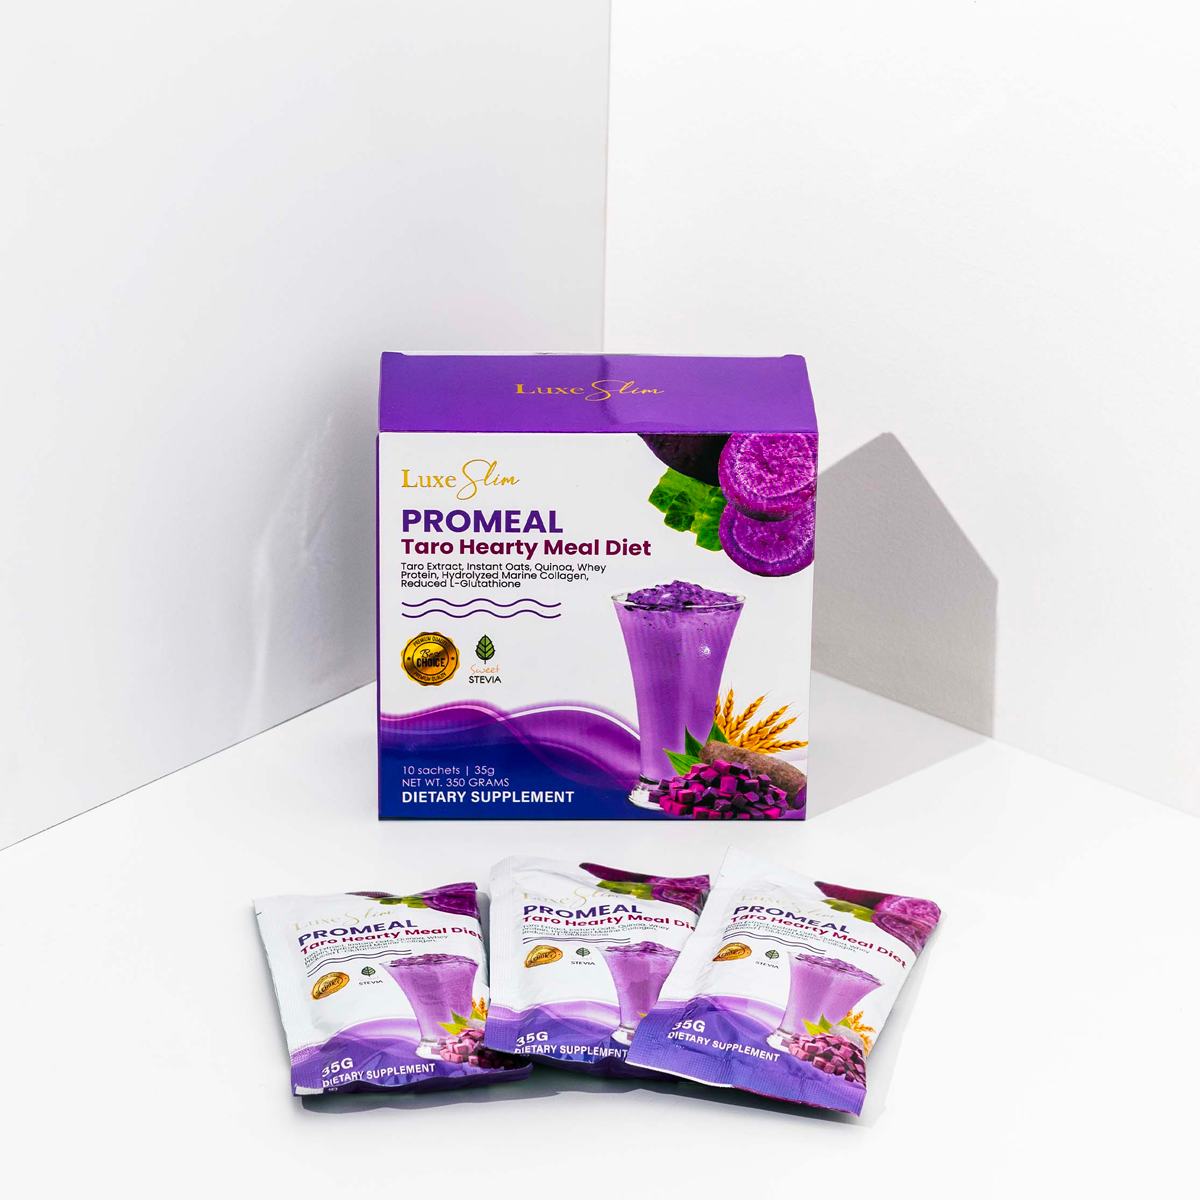 Luxe Slim Promeal Taro Hearty Meal Diet | Filipino Dietary Supplements NZ AU | Bini Beauty - feature photo